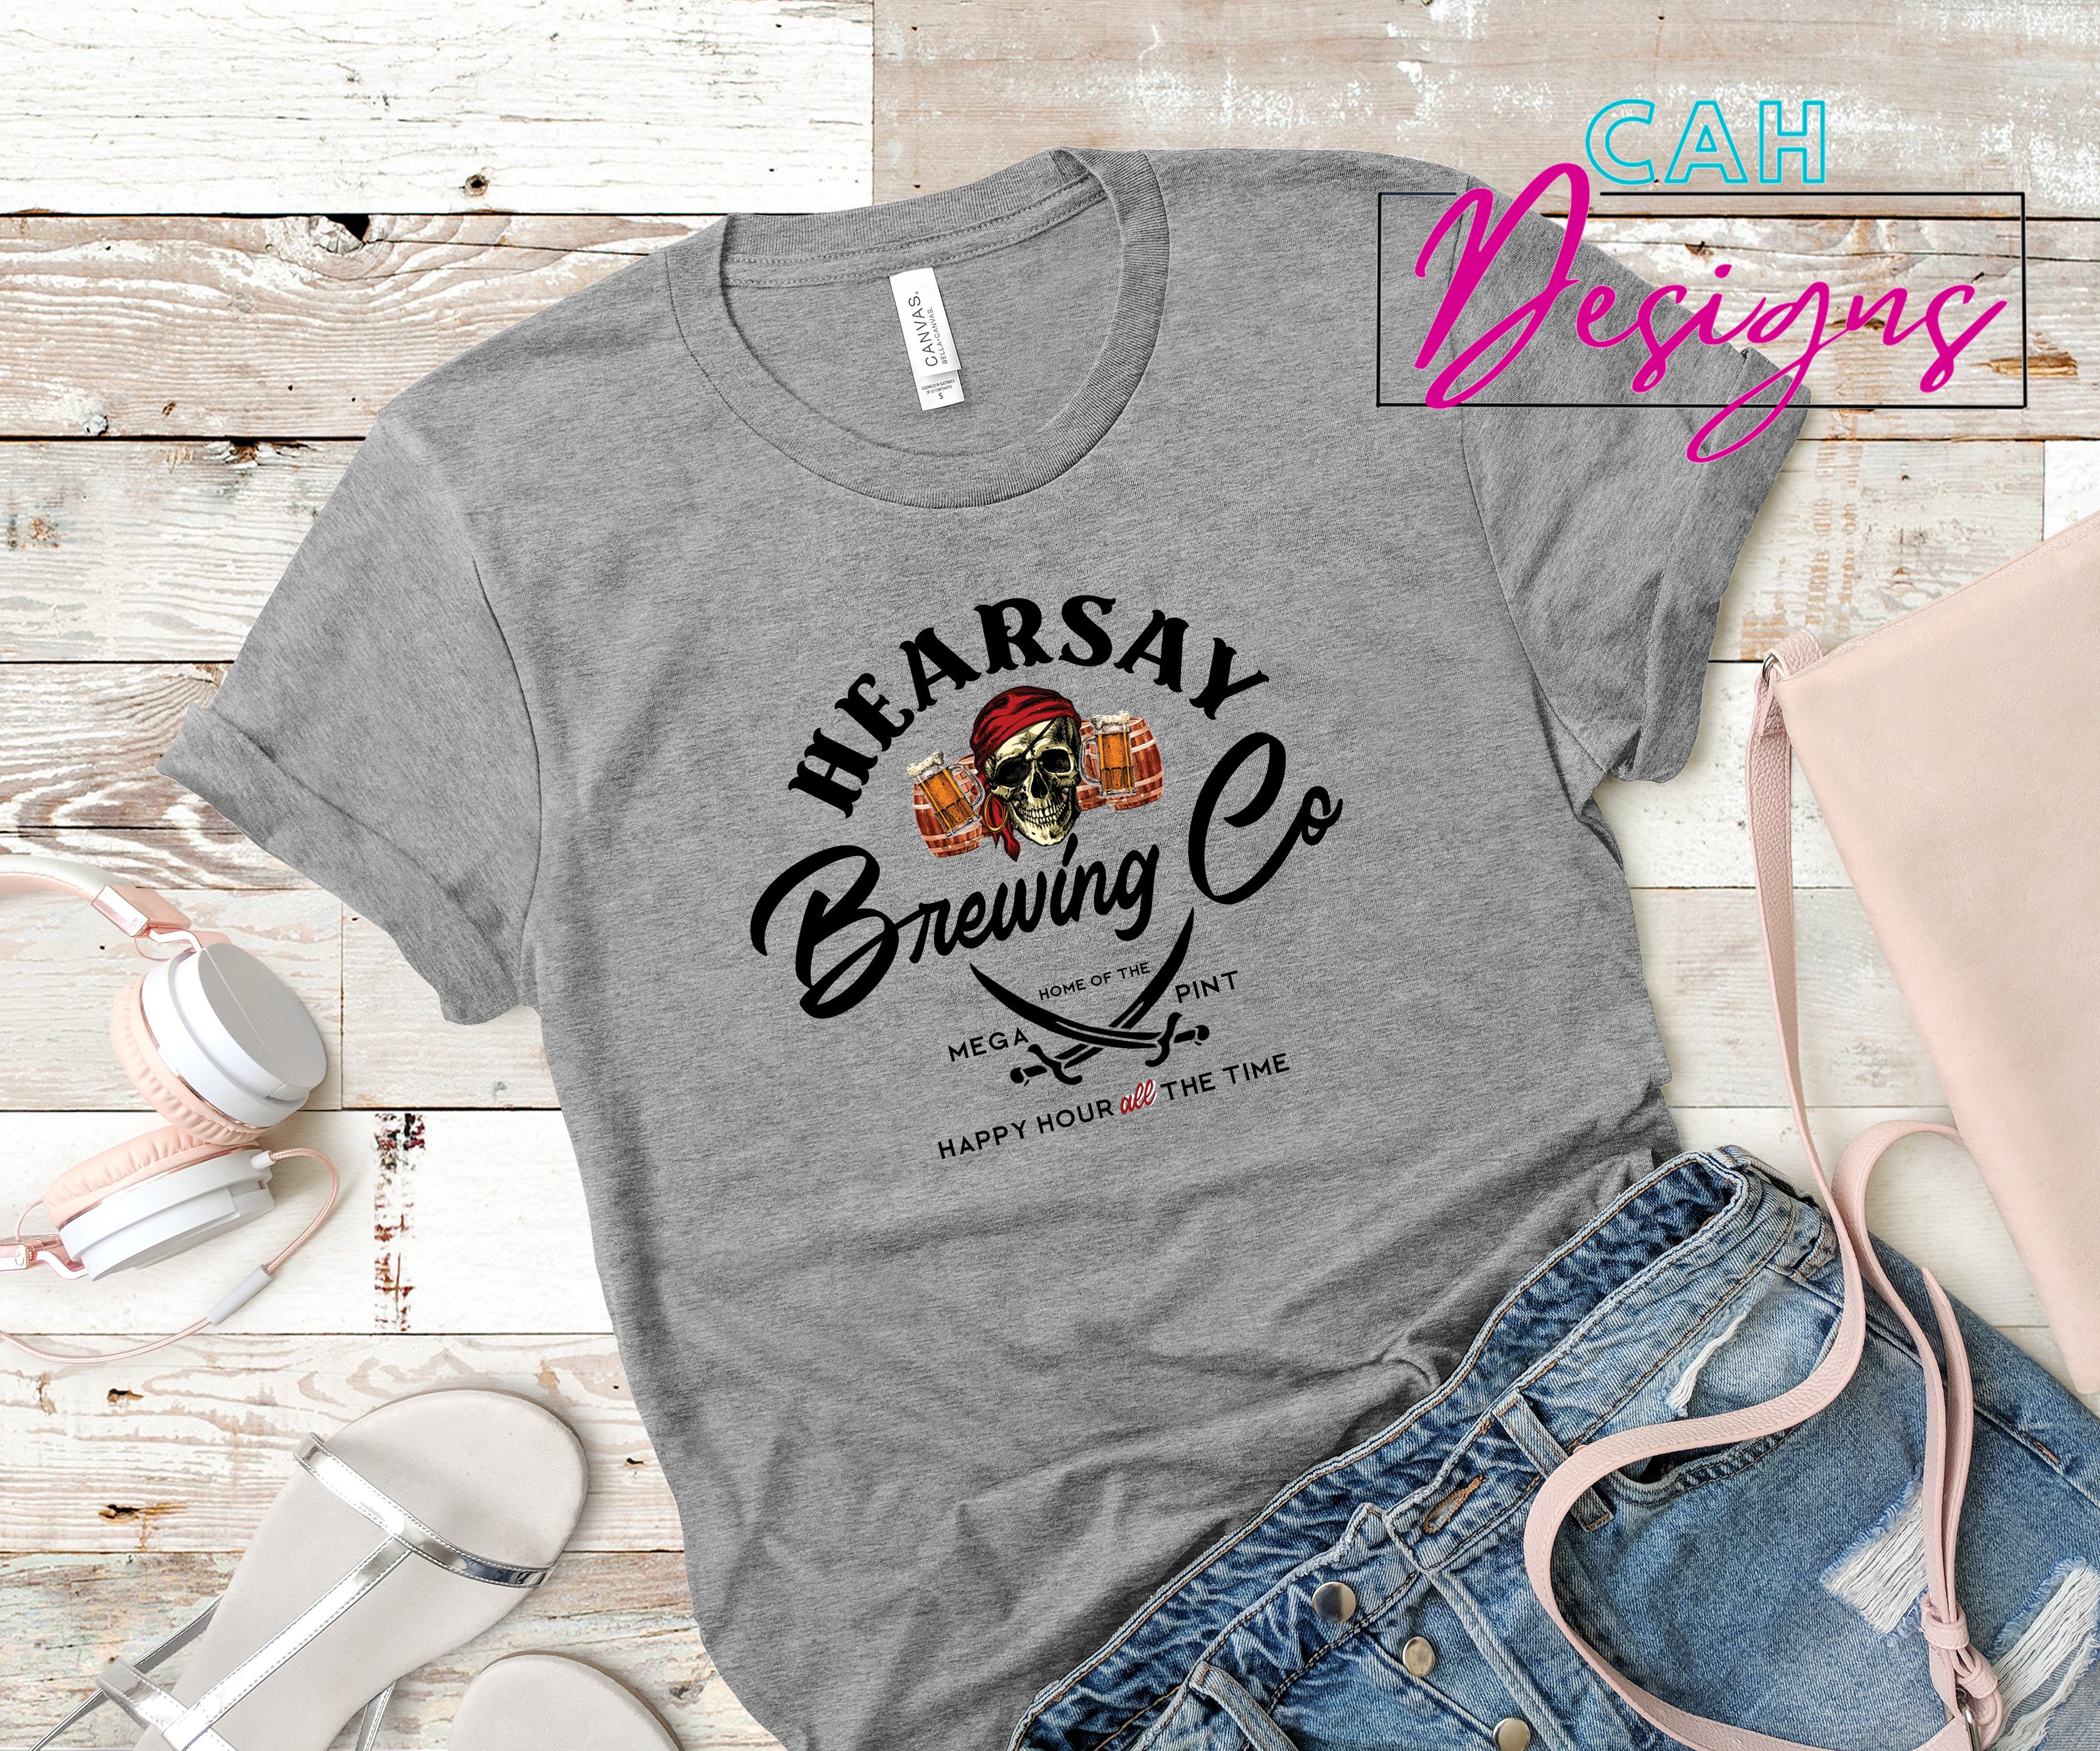 Hearsay Brewing Company T-Shirt - Non Bleached